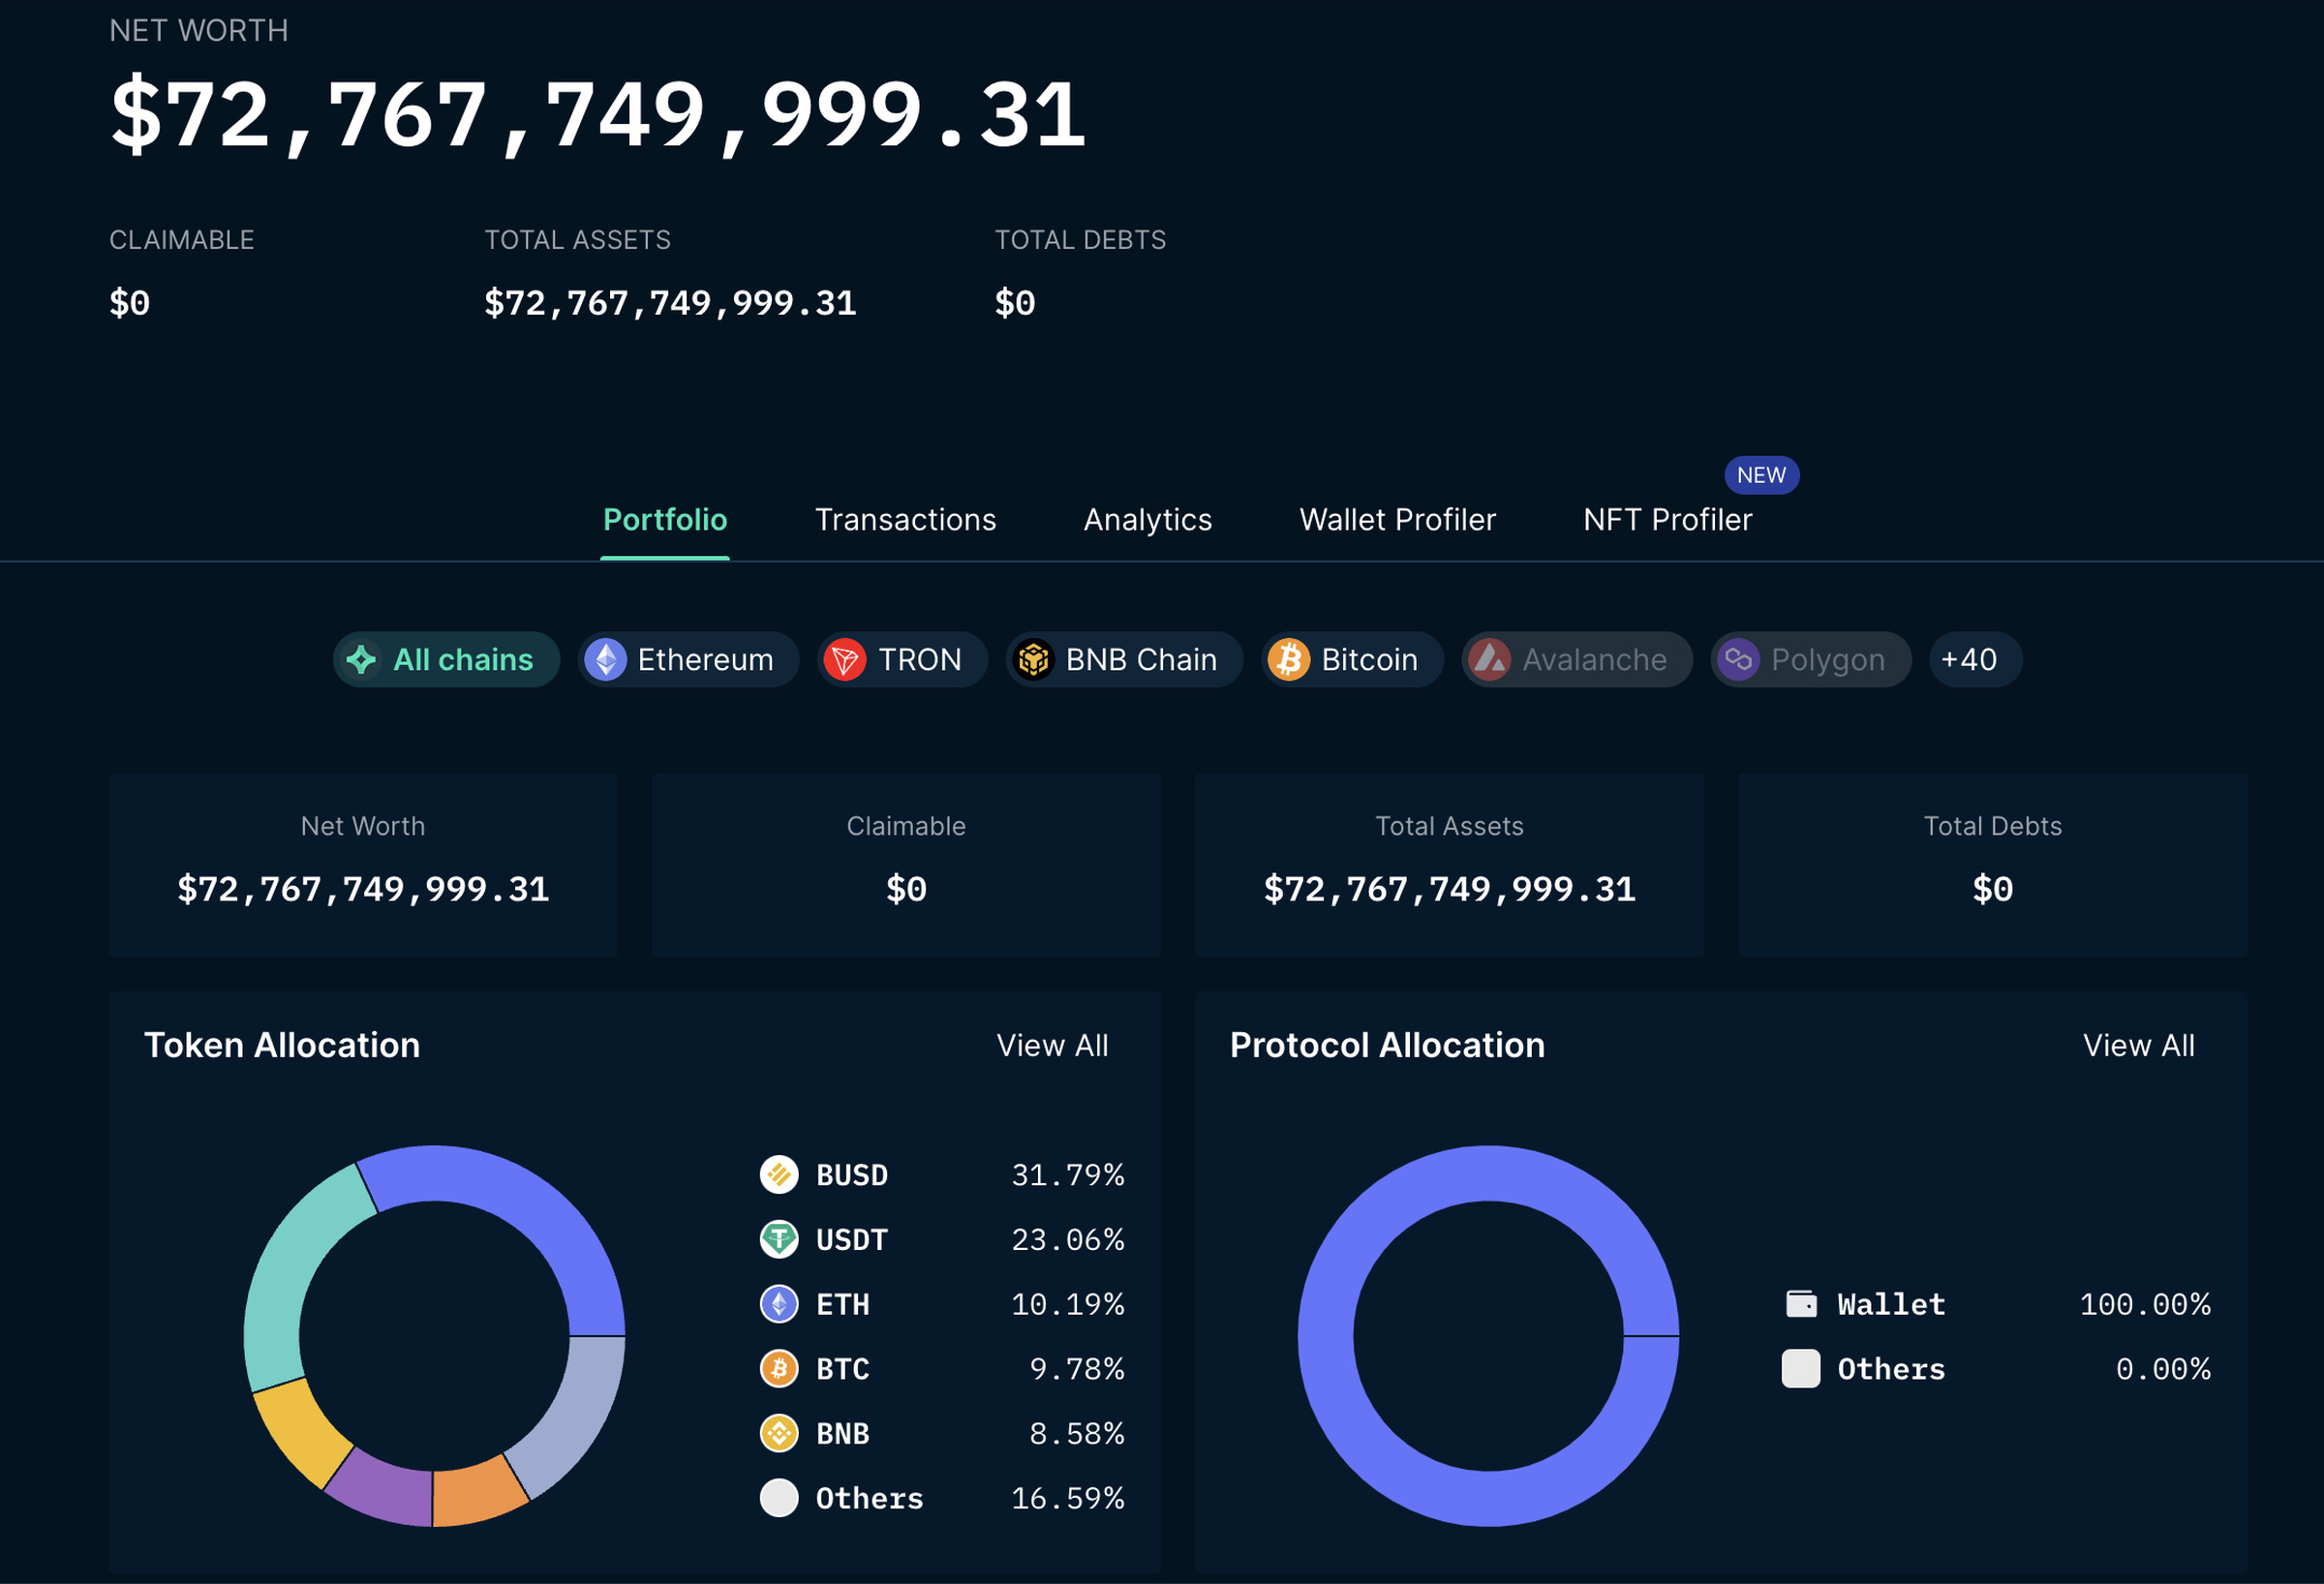 Screenshot of the Nansen dashboard for Binance, showing total assets of $72,767,749,999.31.  A section titled “Token Allocation” shows that the company's holdings are comprised of 31.79% BUSD, 23.06% USDT, 10.19% ETH, 9.78% BTC, 8.58 % of BNB and 16.59% of “others”.